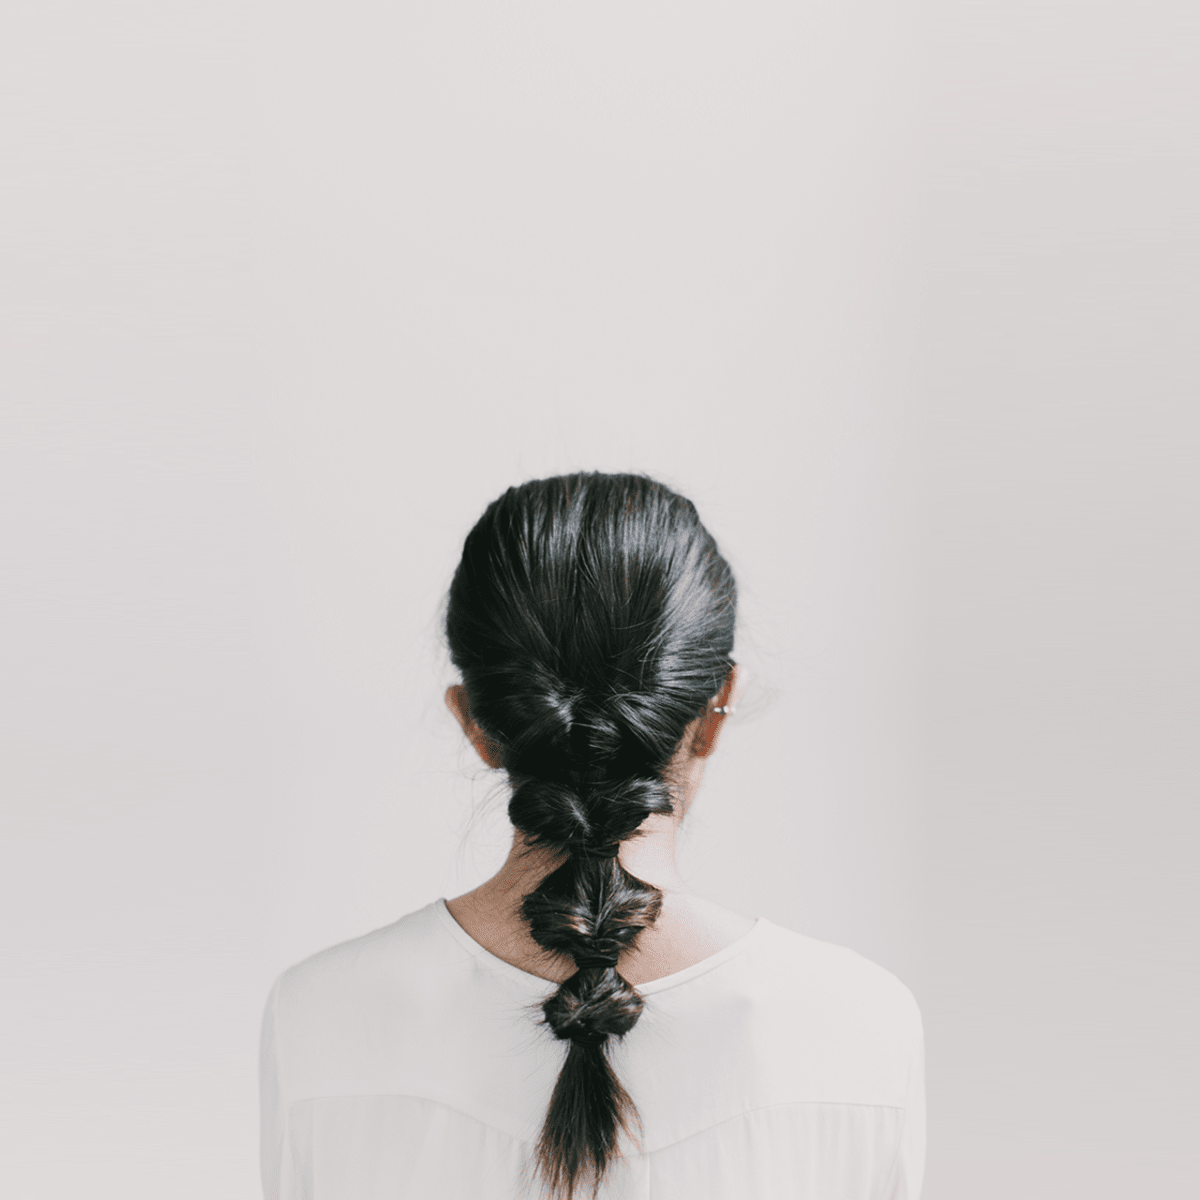 How to Do an Easy and Elegant Faux Fishtail Braid - Verily